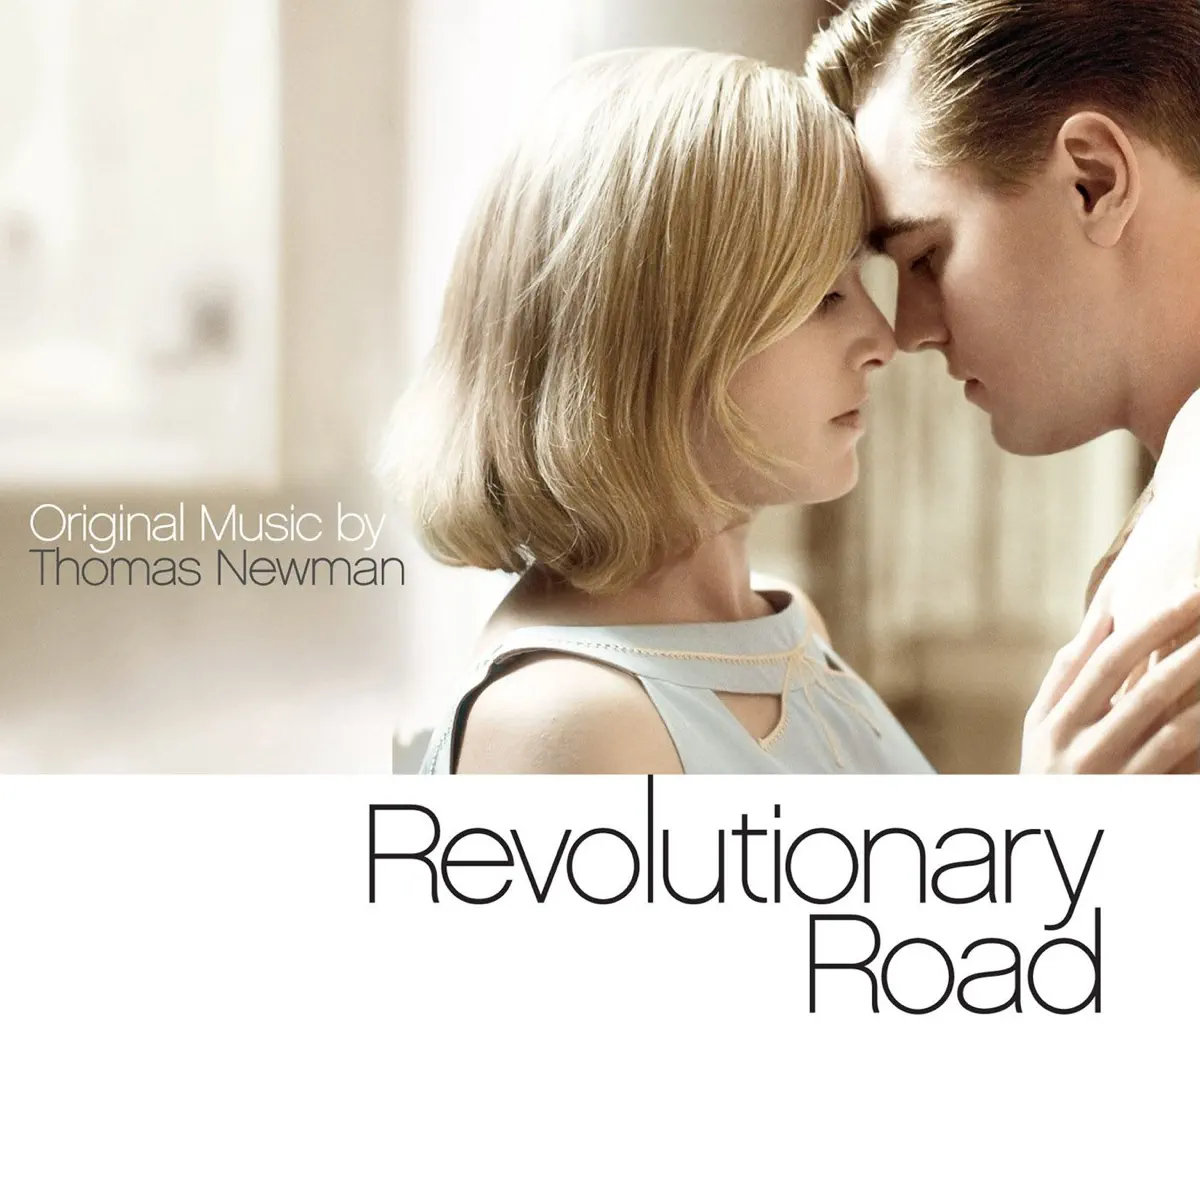 Thomas Newman - 革命之路 Revolutionary Road (Original Music of the Motion Picture) (2008) [iTunes Plus AAC M4A]-新房子